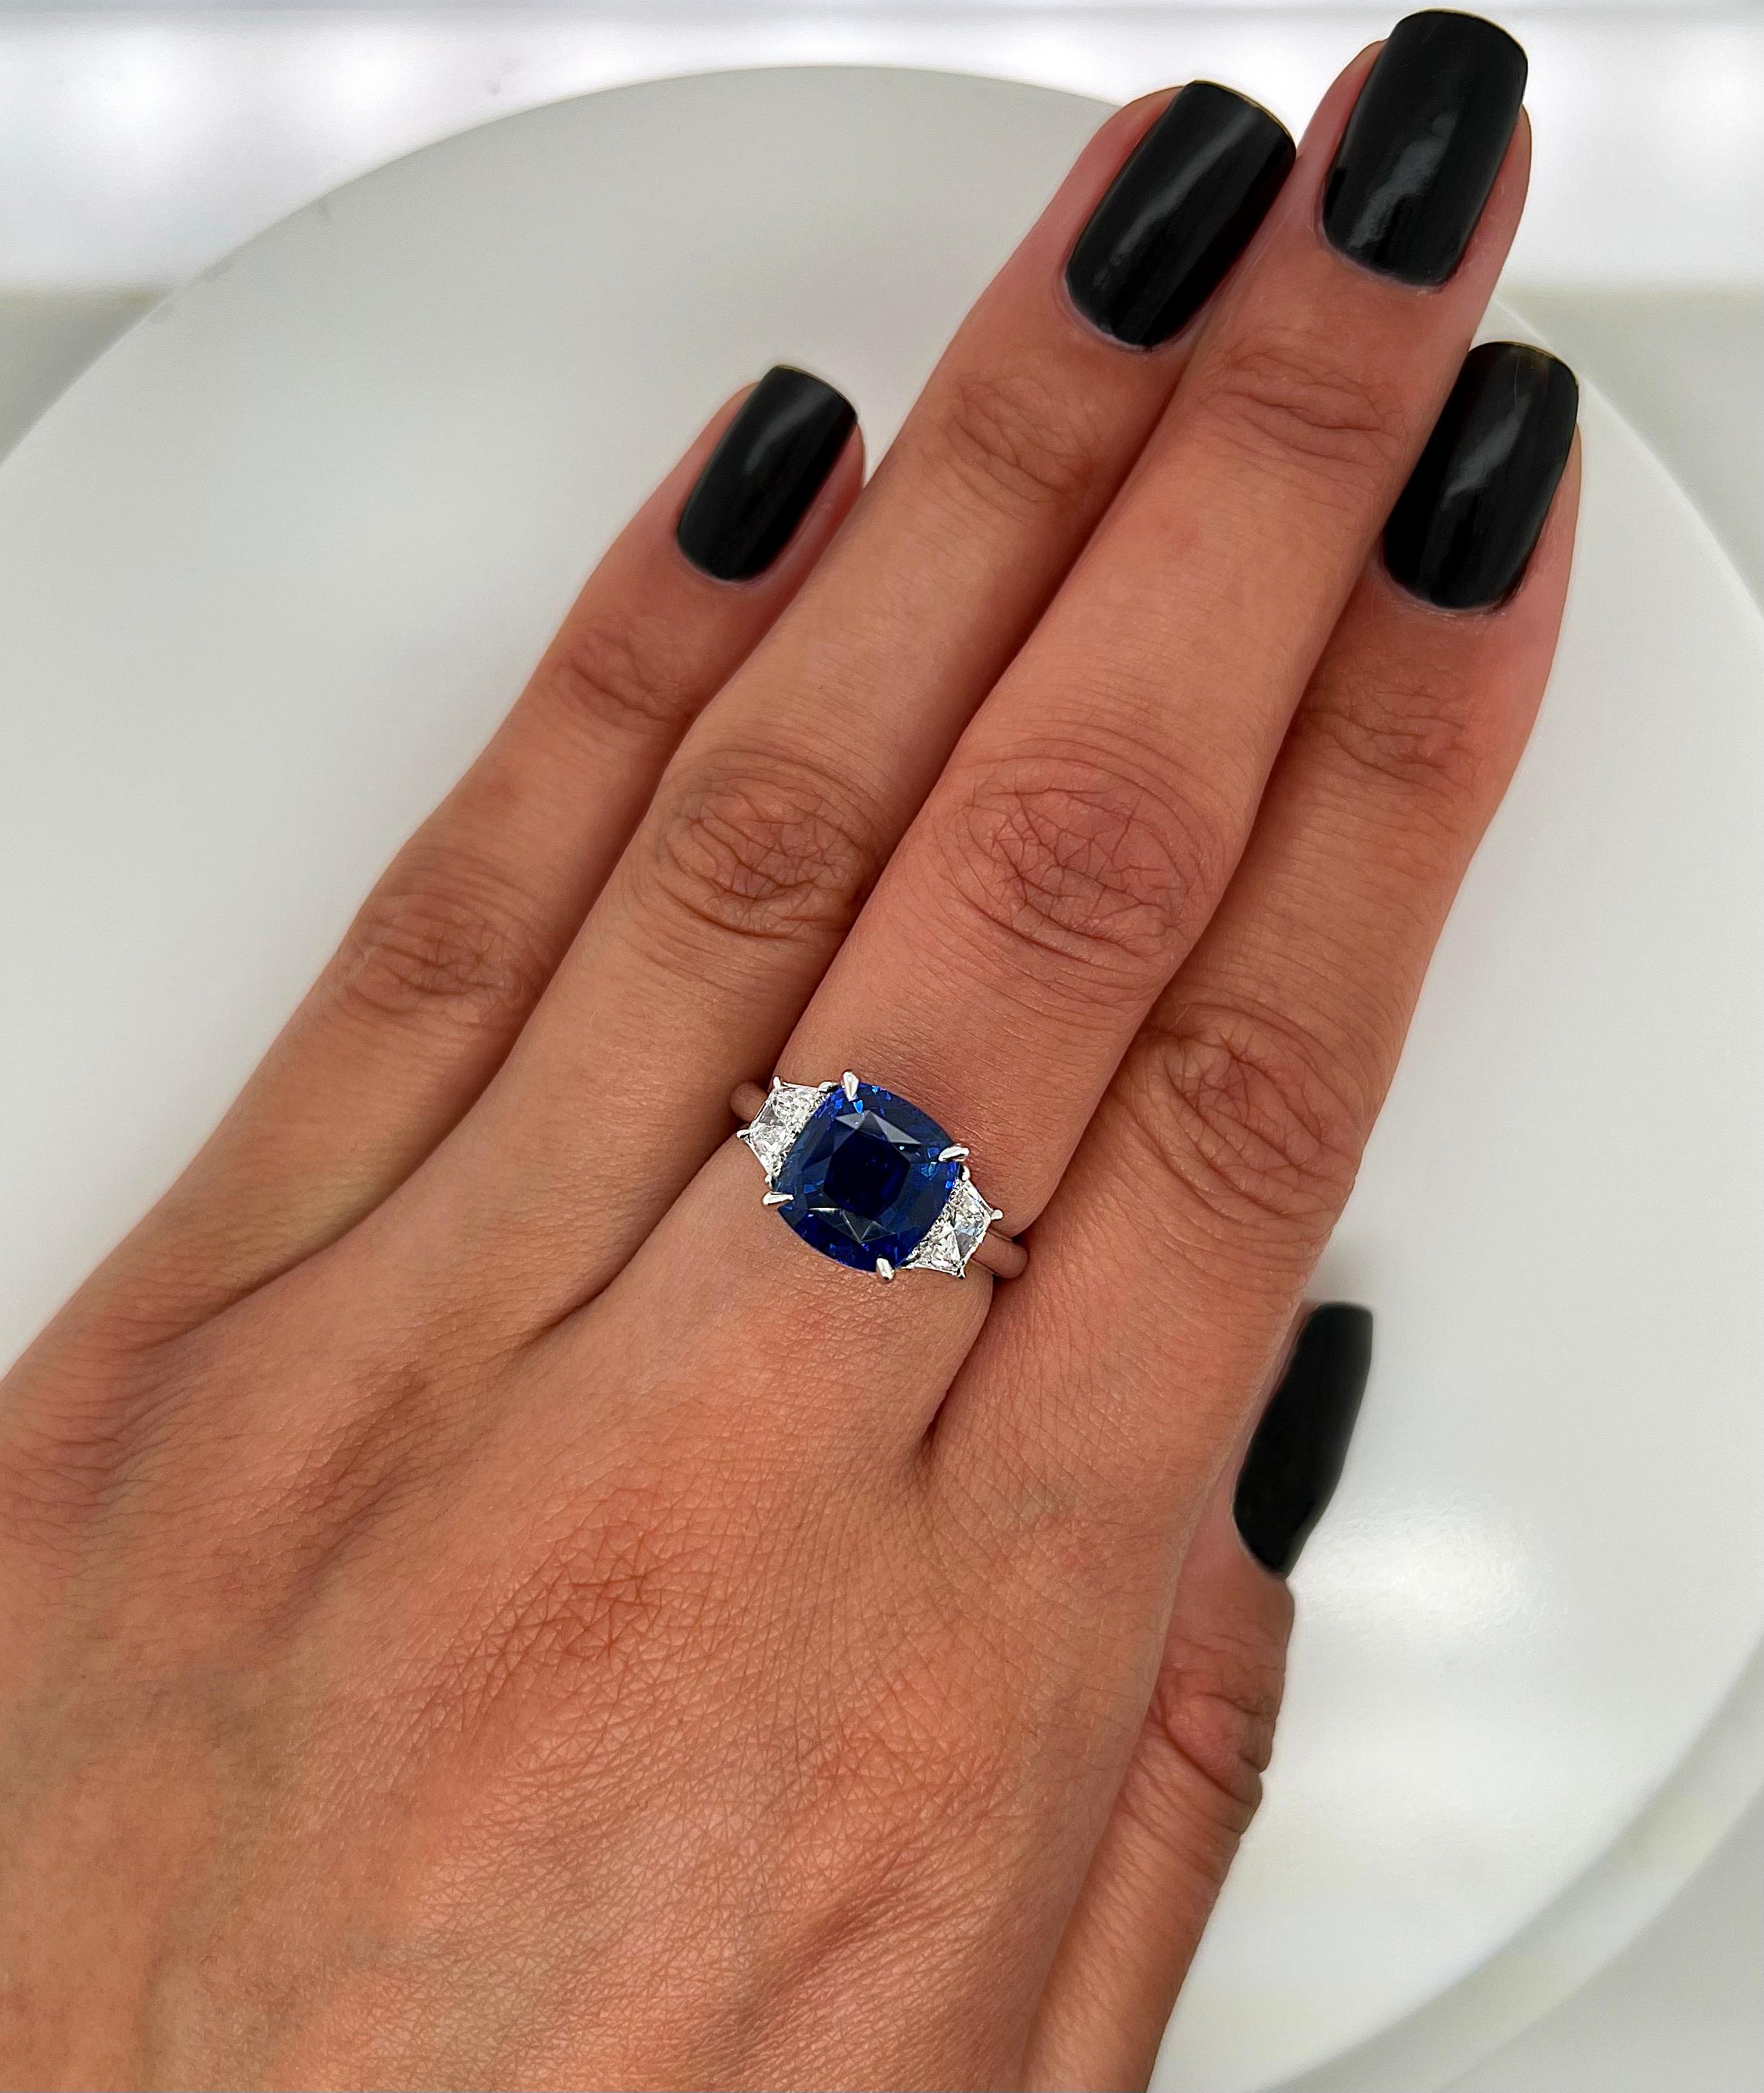 Women's or Men's 5.52 Total Carat Cushion Cut Blue Sapphire & Diamond Ladies Ring GIA Certified. For Sale